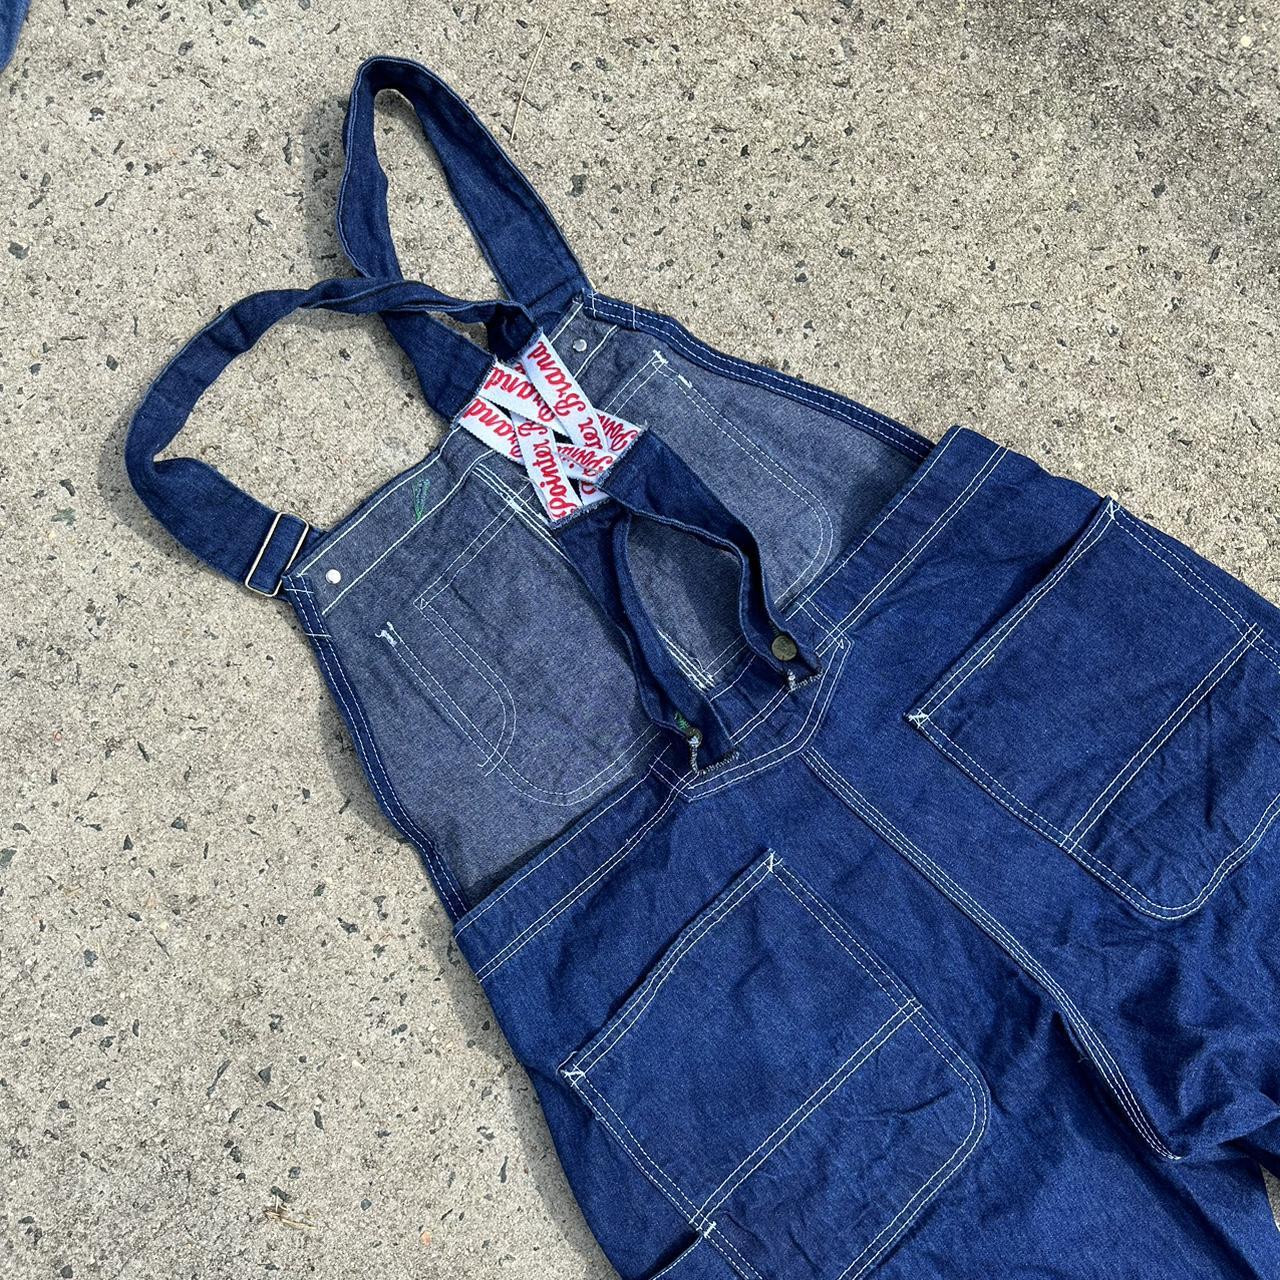 Vintage Pointer Brand 32x30 Denim Low Back Overalls.100% Cotton. Made in  the USA. Bristol Tennessee. Worn in to Perfection. Very Soft. Comfy 